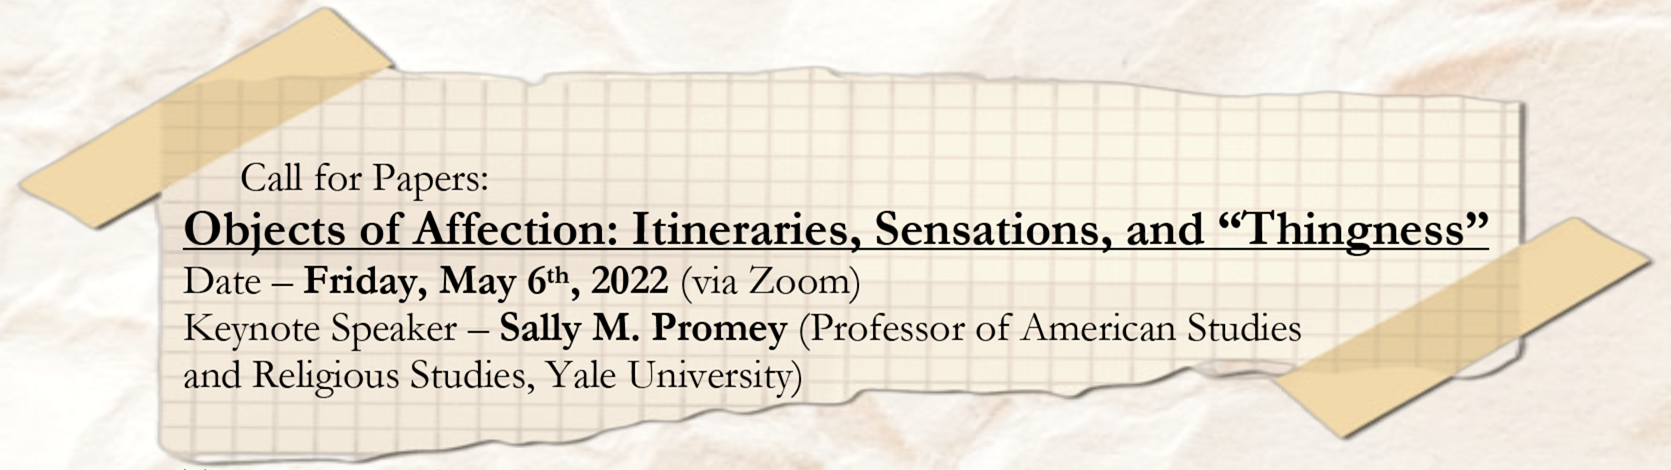 An image of a torn piece of grid paper taped to a sheet of rumpled paper, with the announcement: Call for Papers: Objects of Affection: Itineraries, Sensations, and “Thingness”  Date – Friday, May 6th, 2022 (via Zoom). Keynote Speaker – Sally M. Promey (Professor of American Studies and Religious Studies, Yale University).